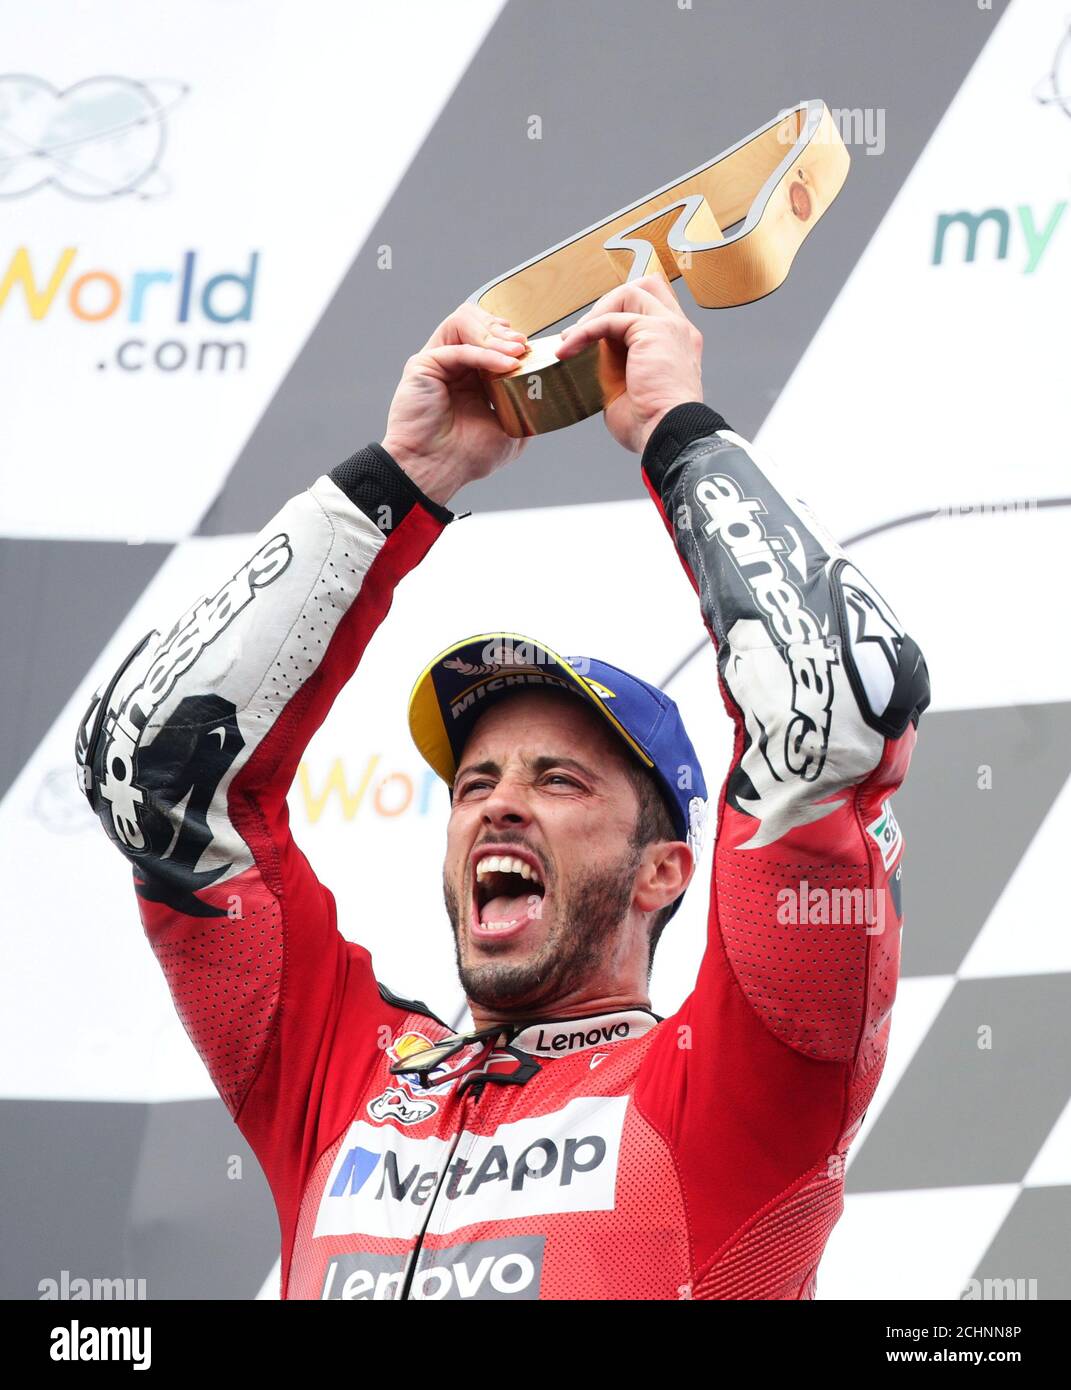 MotoGP - Austrian Grand Prix - Red Bull Ring, Spielberg, Austria - August  11, 2019 Ducati Team's Andrea Dovizioso celebrates on the podium with  trophy after winning the MotoGP race REUTERS/Lisi Niesner Stock Photo -  Alamy